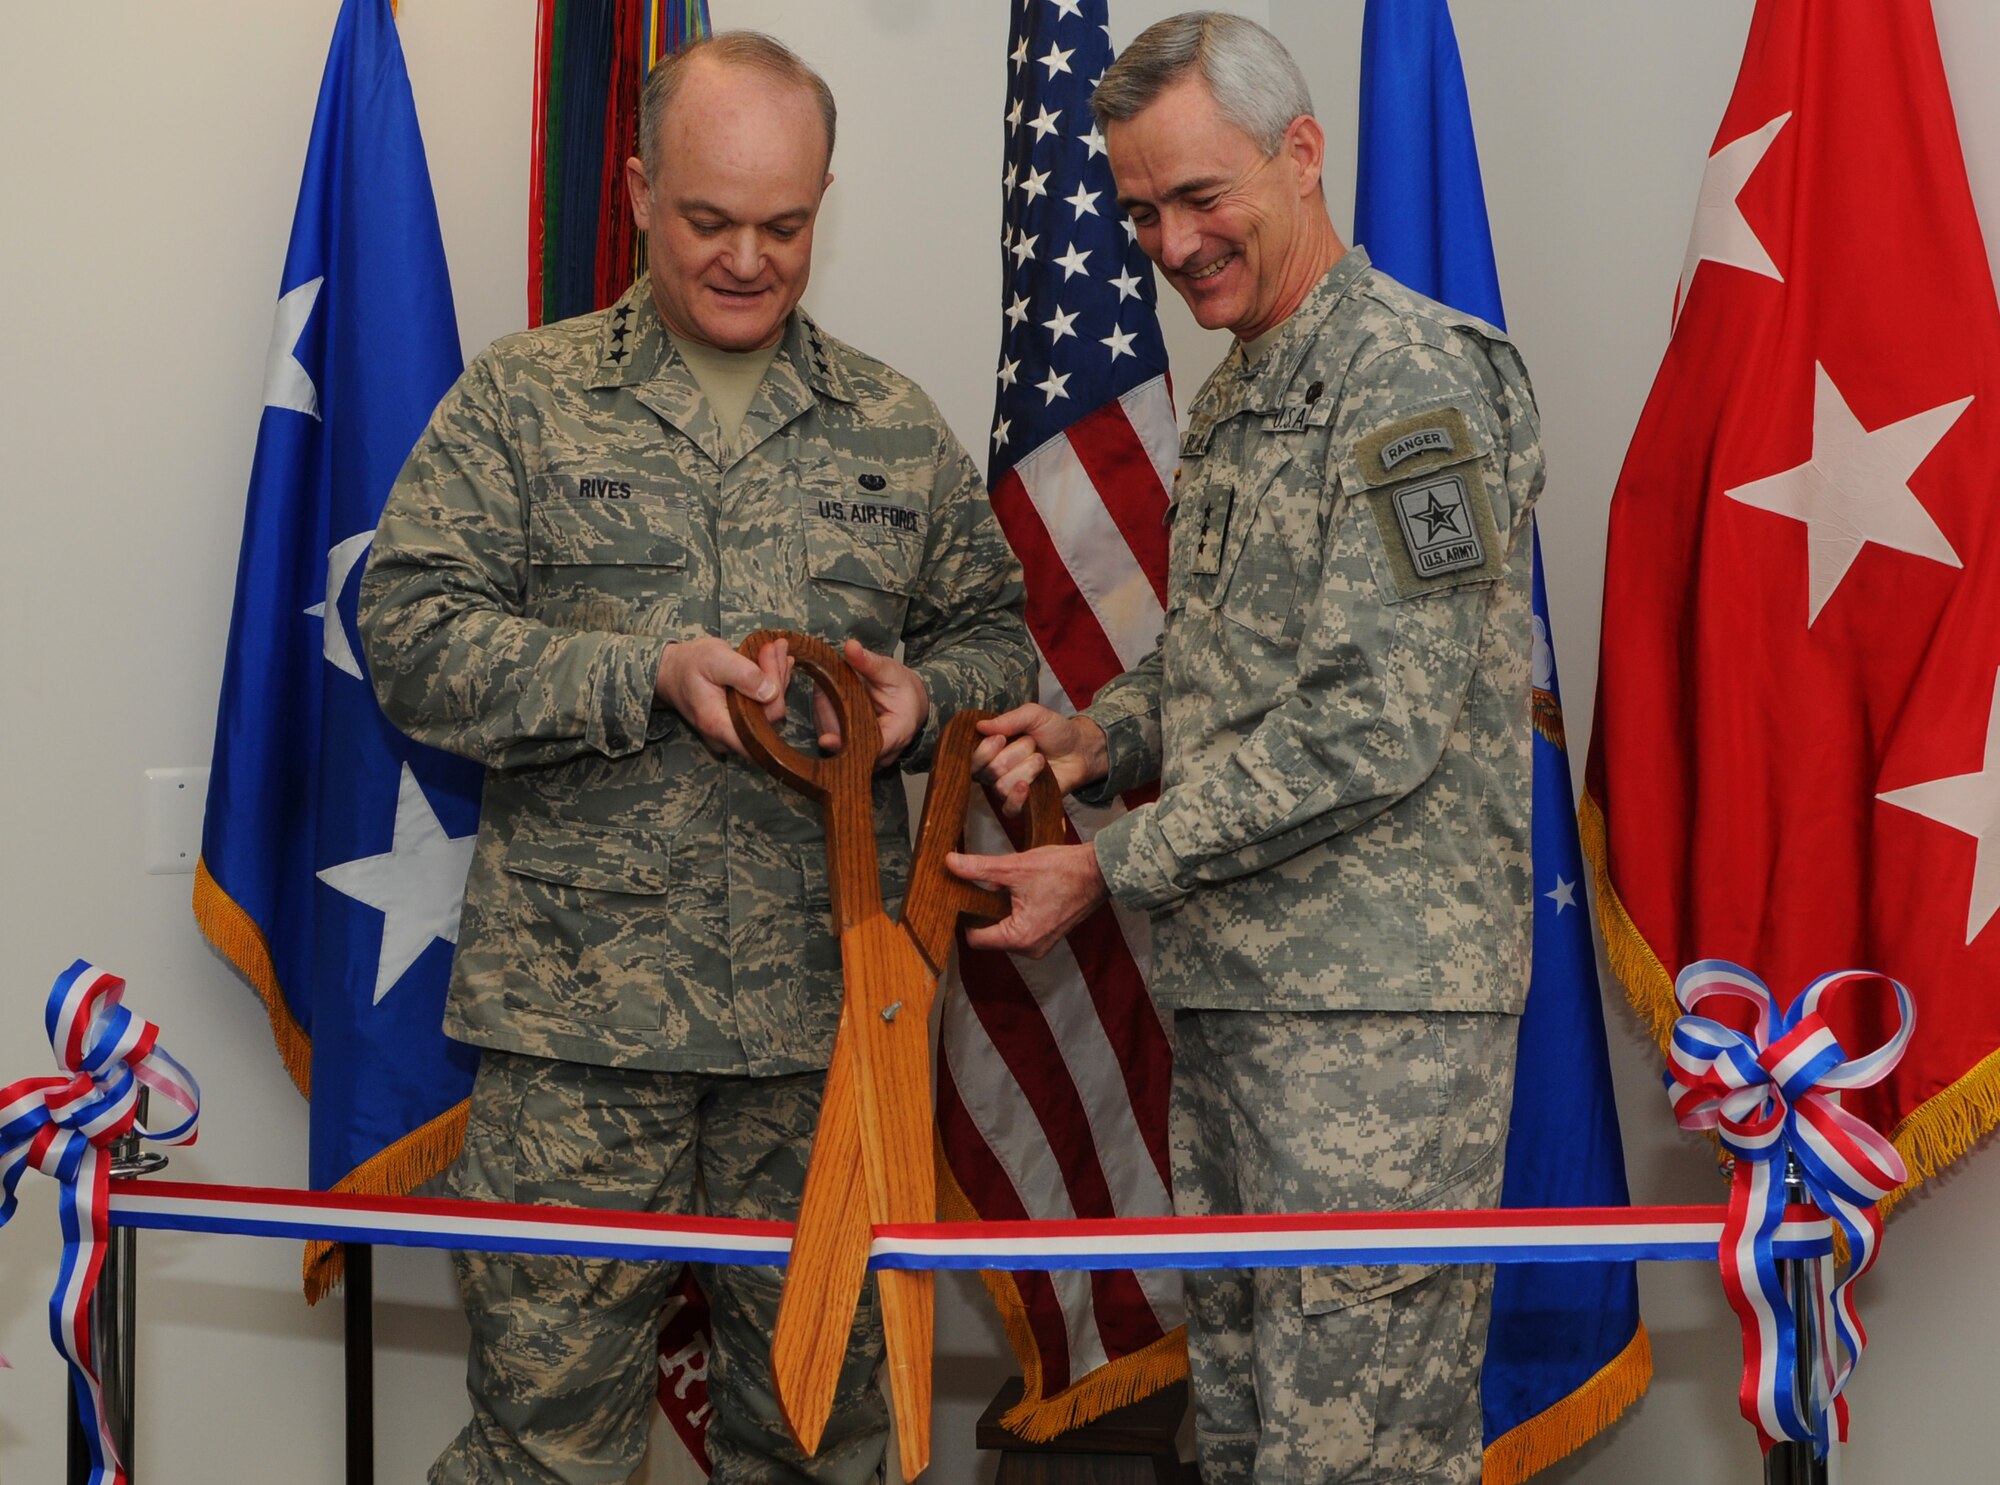 Lt. Gen. Jack L. Rives and Lt. Gen. Scott C. Black perform the ribbon cutting at the Pentagon Army Air Force Legal Assistance Office Feb. 25. The PAAFLAO offers legal assistance to active duty Army and Air Force personnel and their families, retirees and their families and certain National Guard and Reserve servicemembers. For more information or to schedule an appointment, call (703) 571-3114. Directions to the office from the Pentagon Metro Station are available upon request. (U.S. Air Force photo by Thomas Dennis)